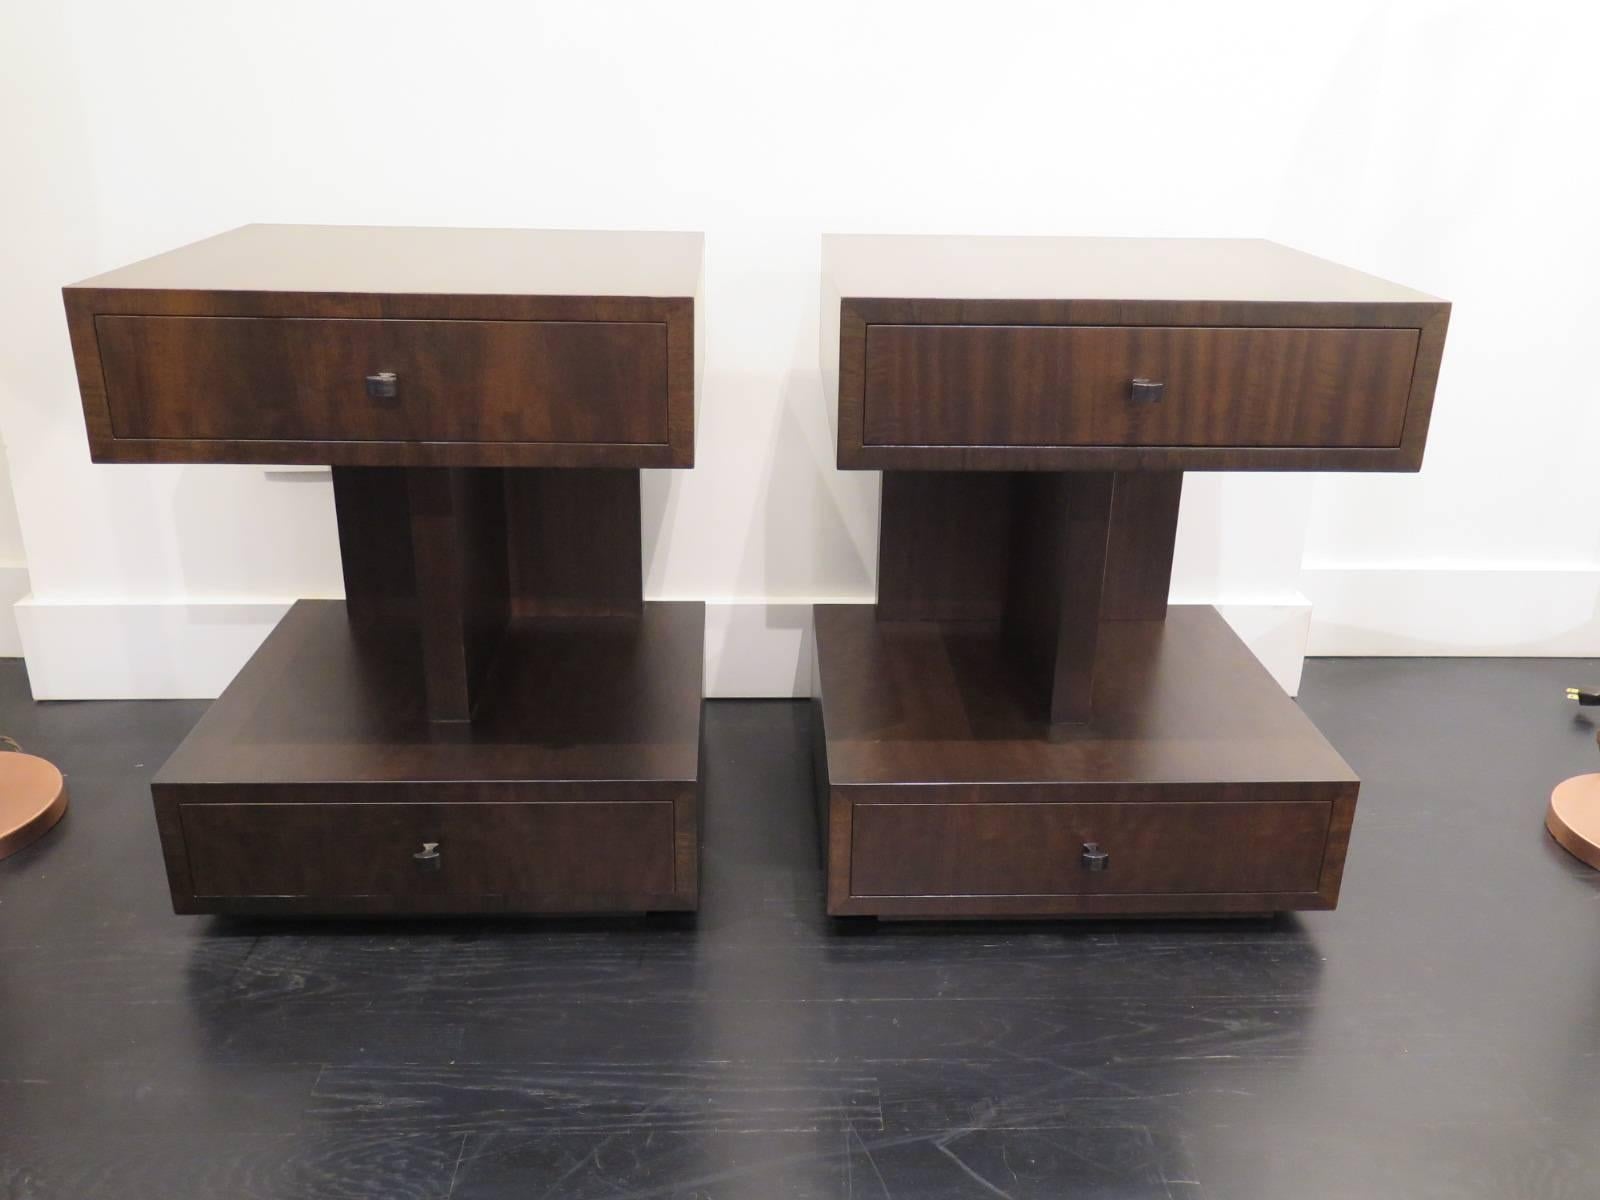 Beautiful mahogany sidetables by Andrew Szoeke with top and bottom brass handled drawers. Refinished, with brass handles. The side tables have fully finished backs.